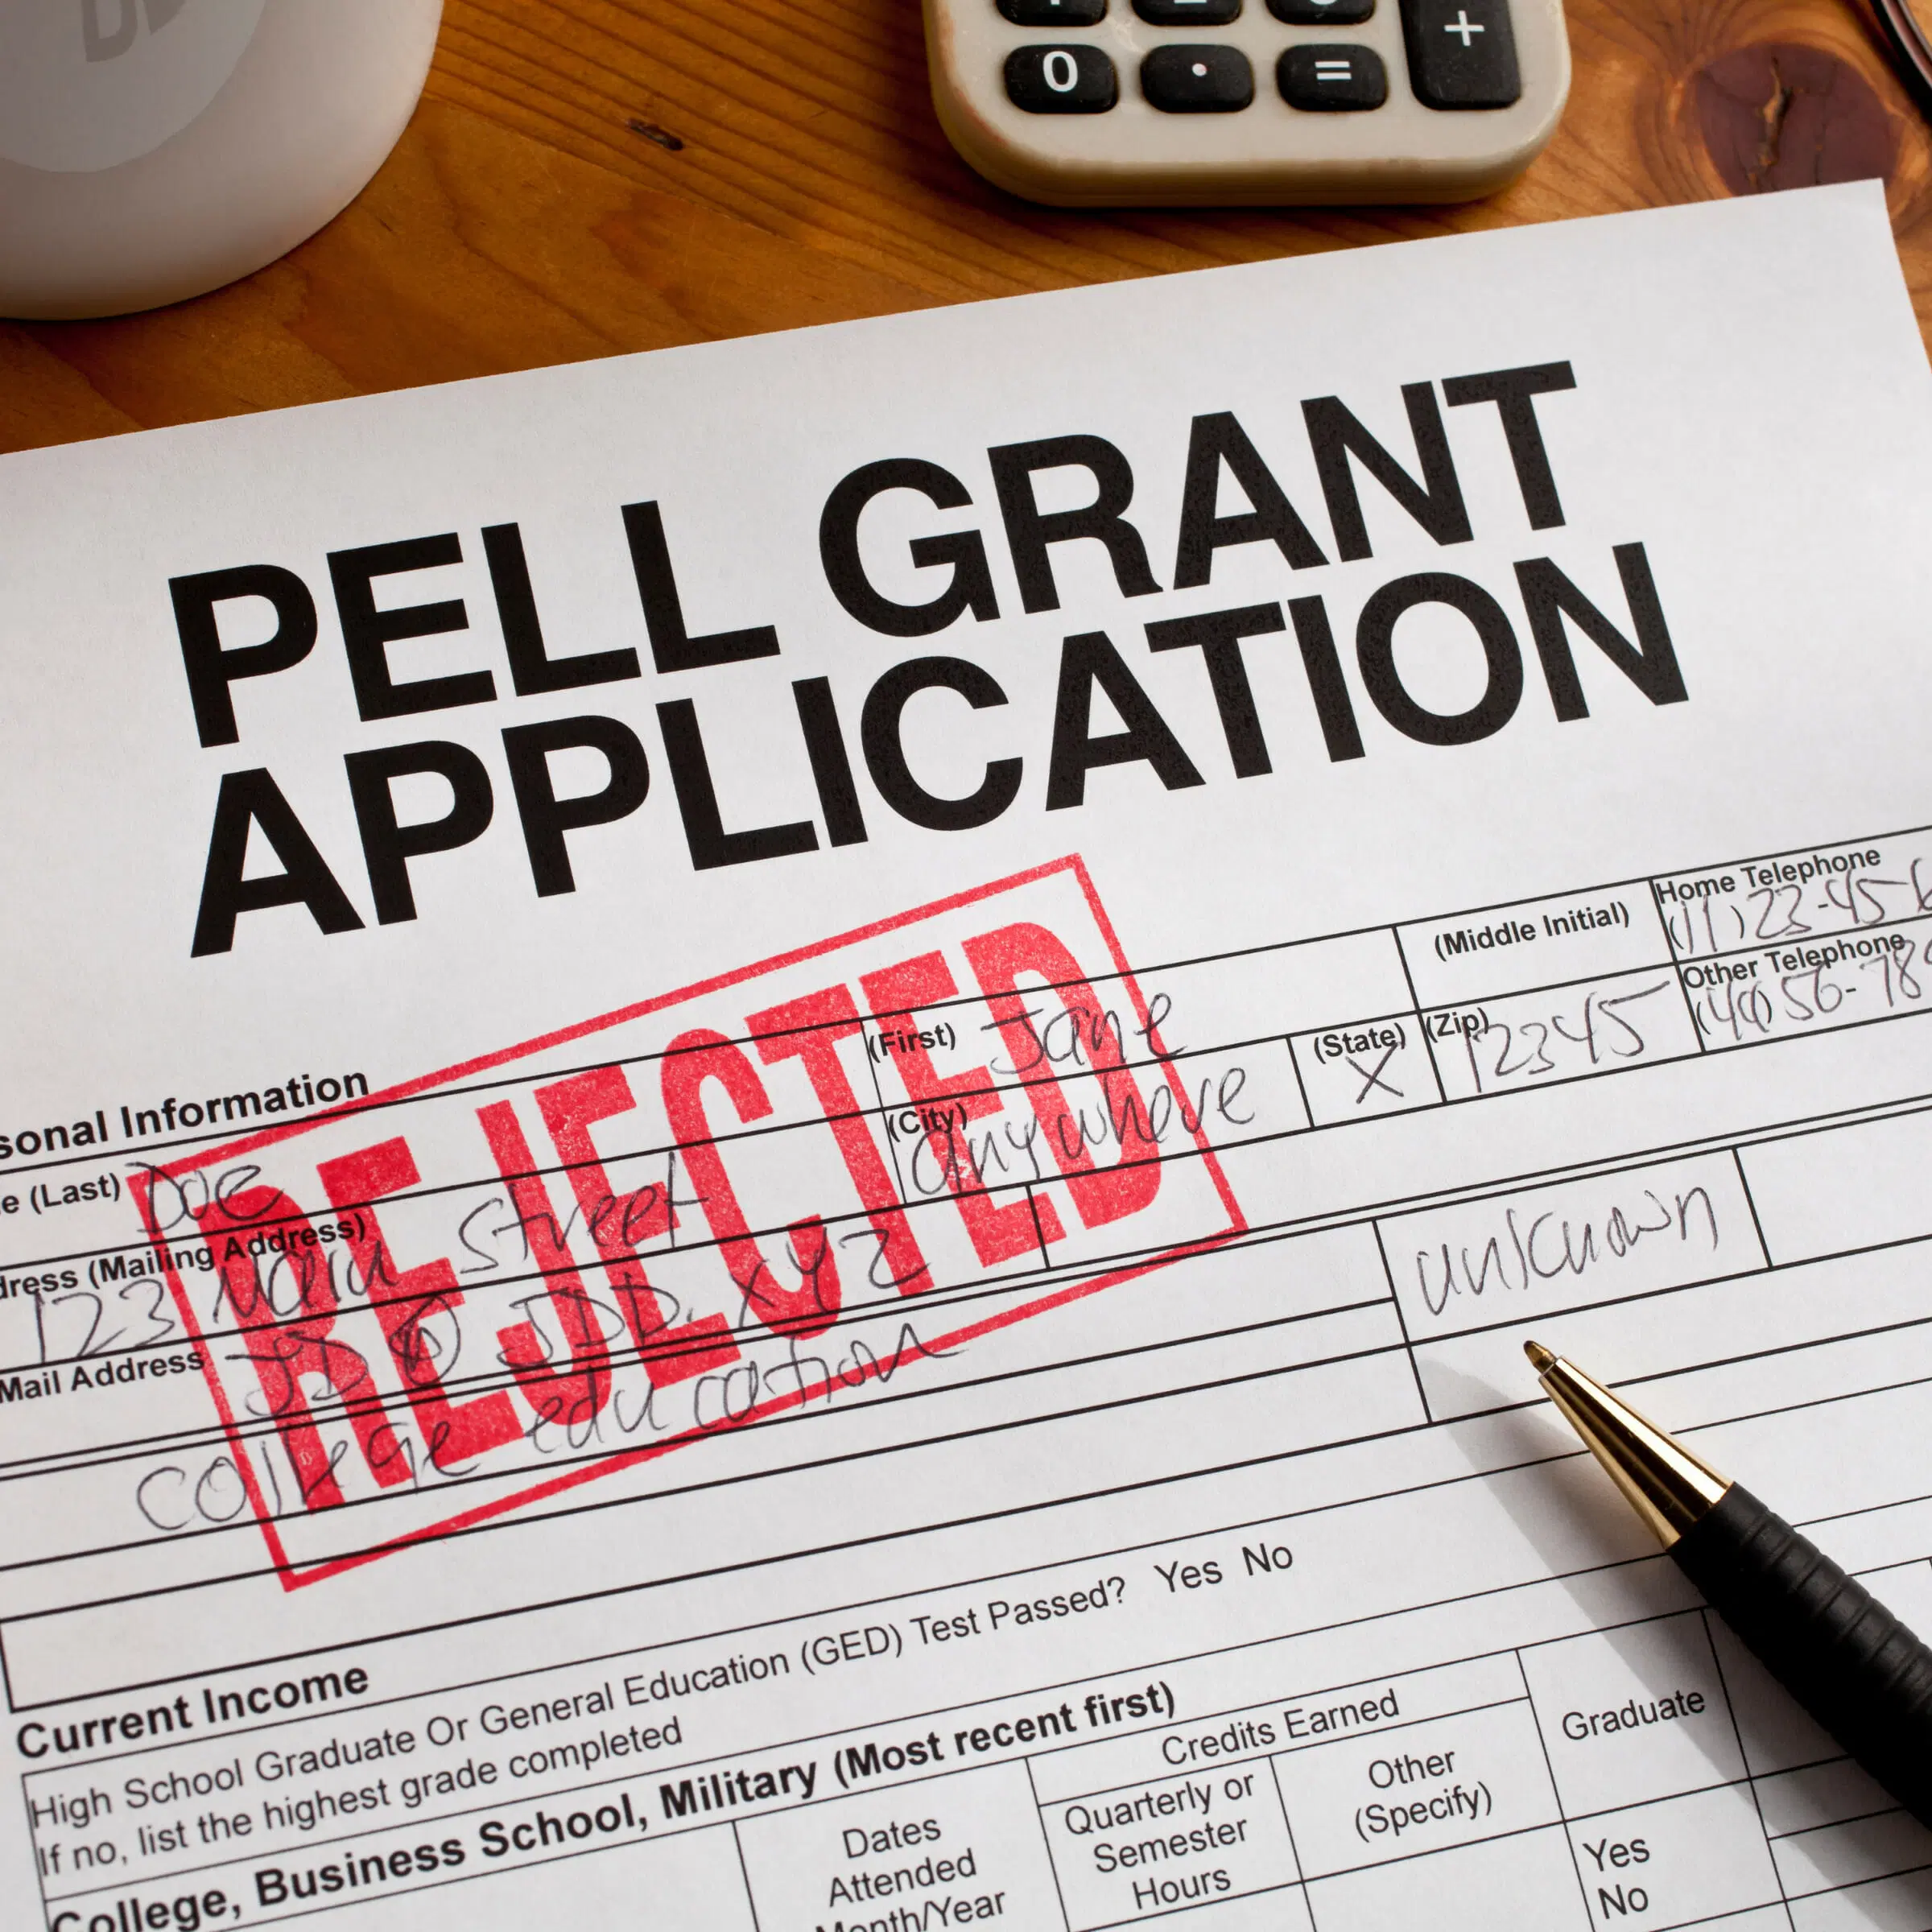 What are the opportunities and challenges of expanding Pell Grants?